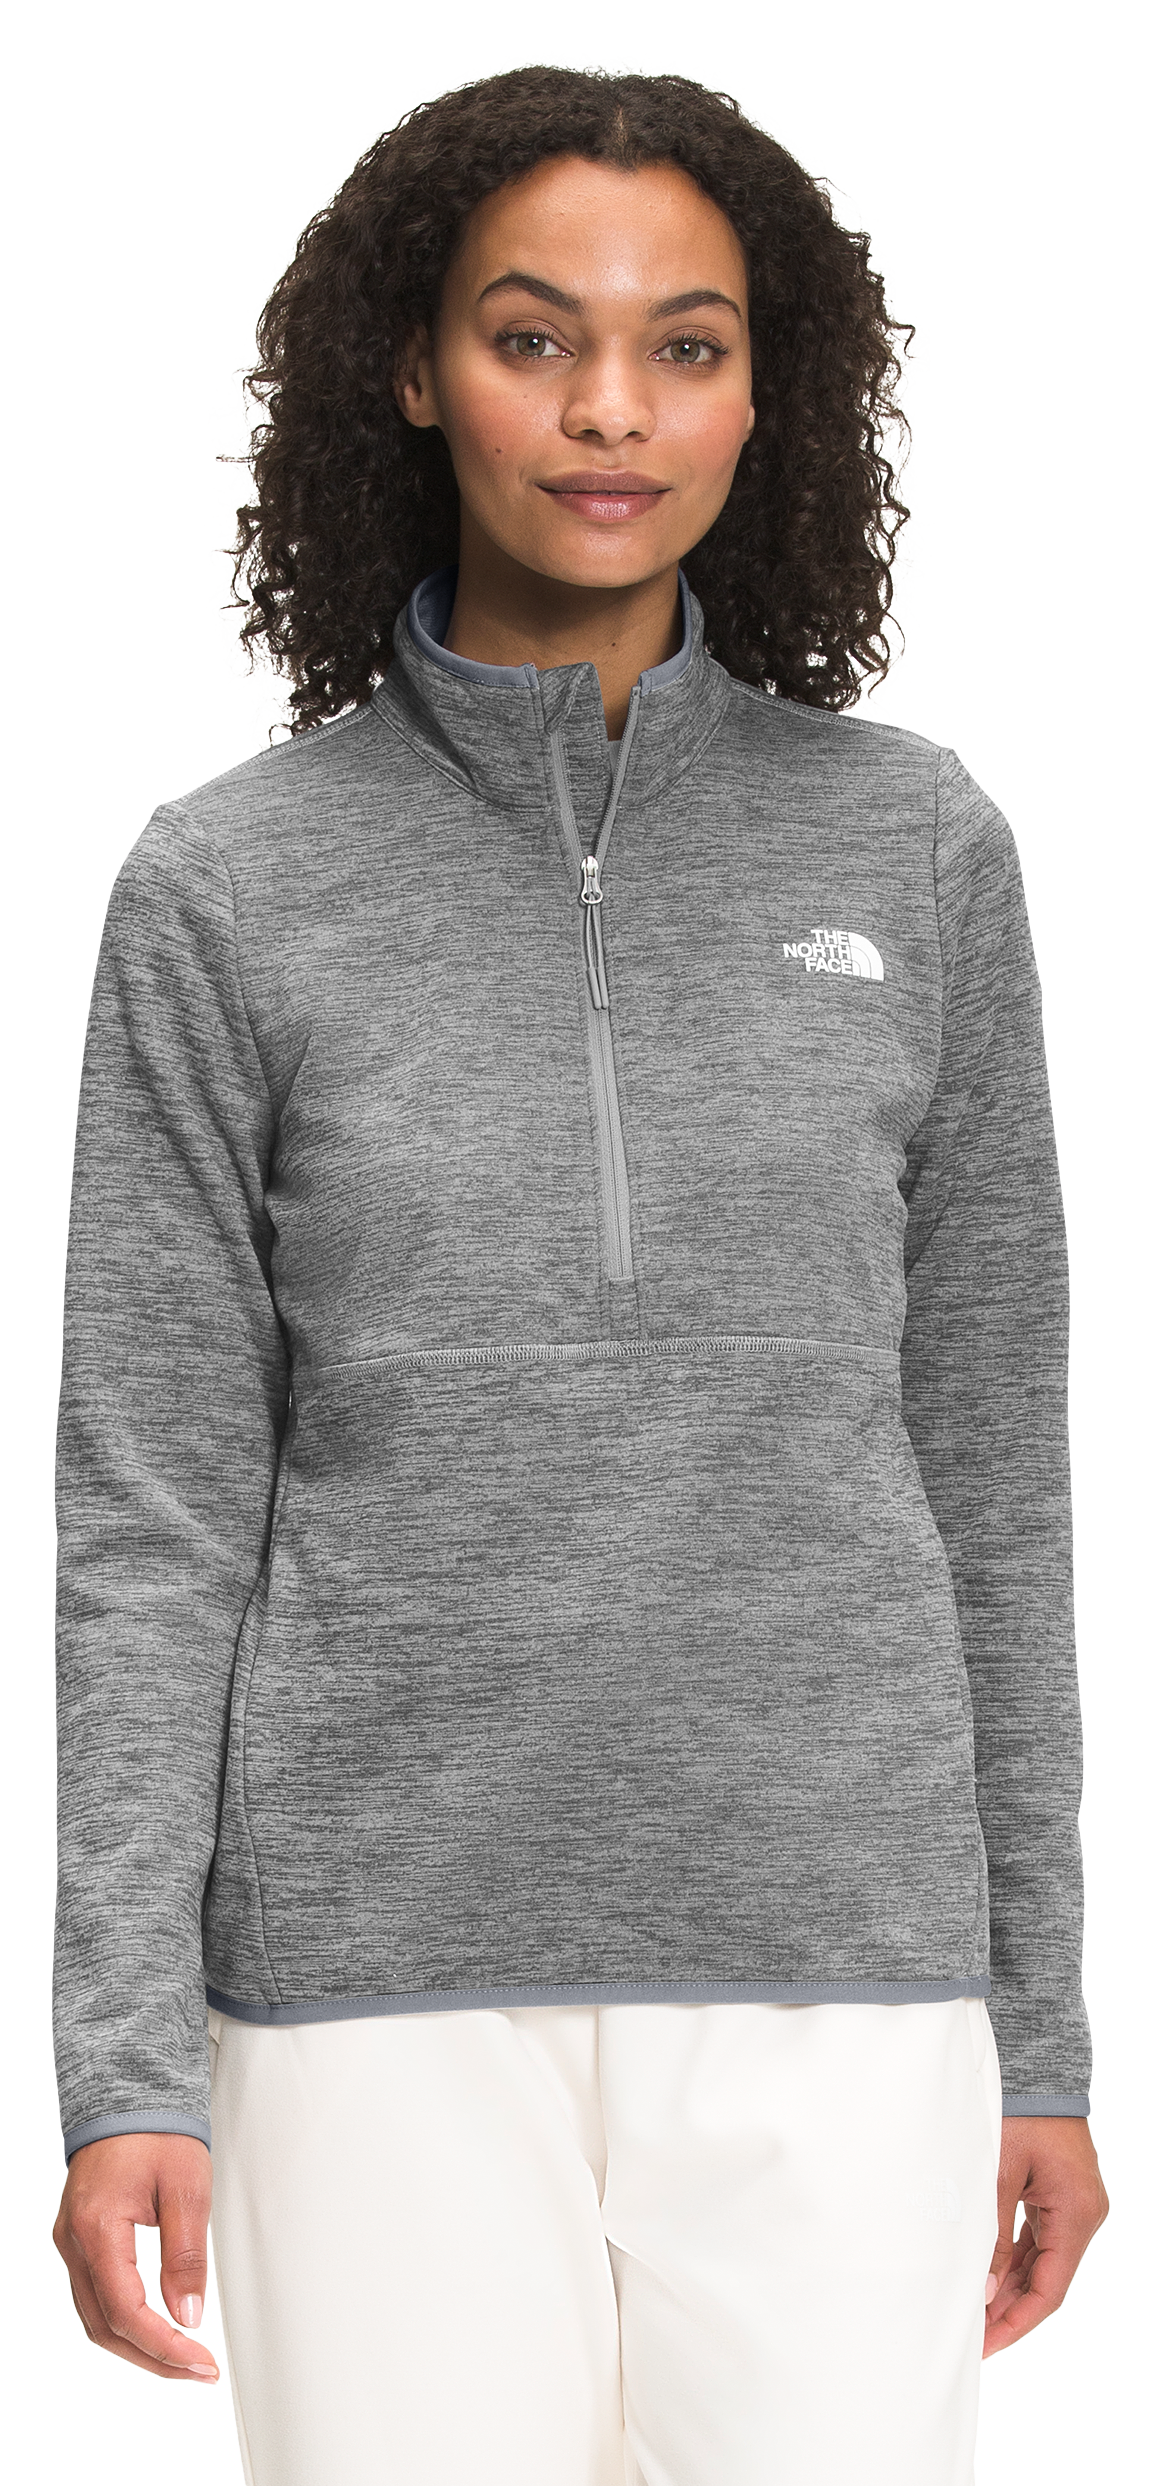 The North Face Canyonlands 1/4-Zip Jacket for Ladies - TNF Medium Grey Heather - 3XL